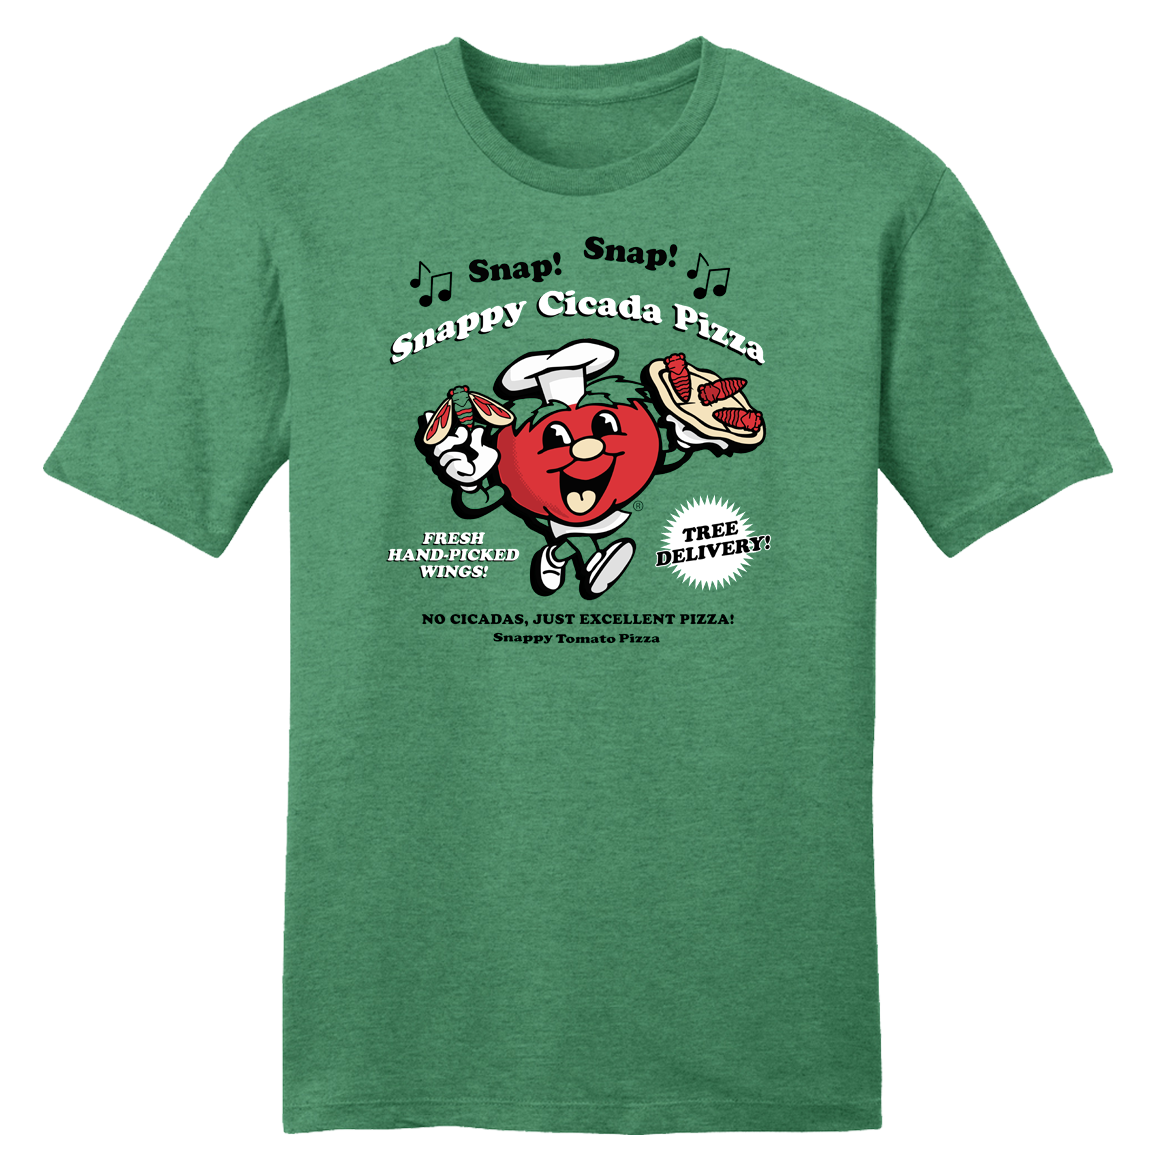 Our friends at Cincy Shirts just debuted the ALL NEW Snappy Cicada Pizza t-shirt.  Purchase one for yourself, for a friend and it is the PERFECT Father's Day Gift, when combined with a Snappy Tomato Pizza.  

Thank you Cincy Shirts for helping us celebrate the return of the Brood X Cicadas in style.

Order your Snappy Cicada t-shirt (http://bit.ly/SnappyCicadaShirt)
Order your Snappy Tomato Pizza (http://bit.ly/SnappyTomato) 
and celebrate those Cicadas!